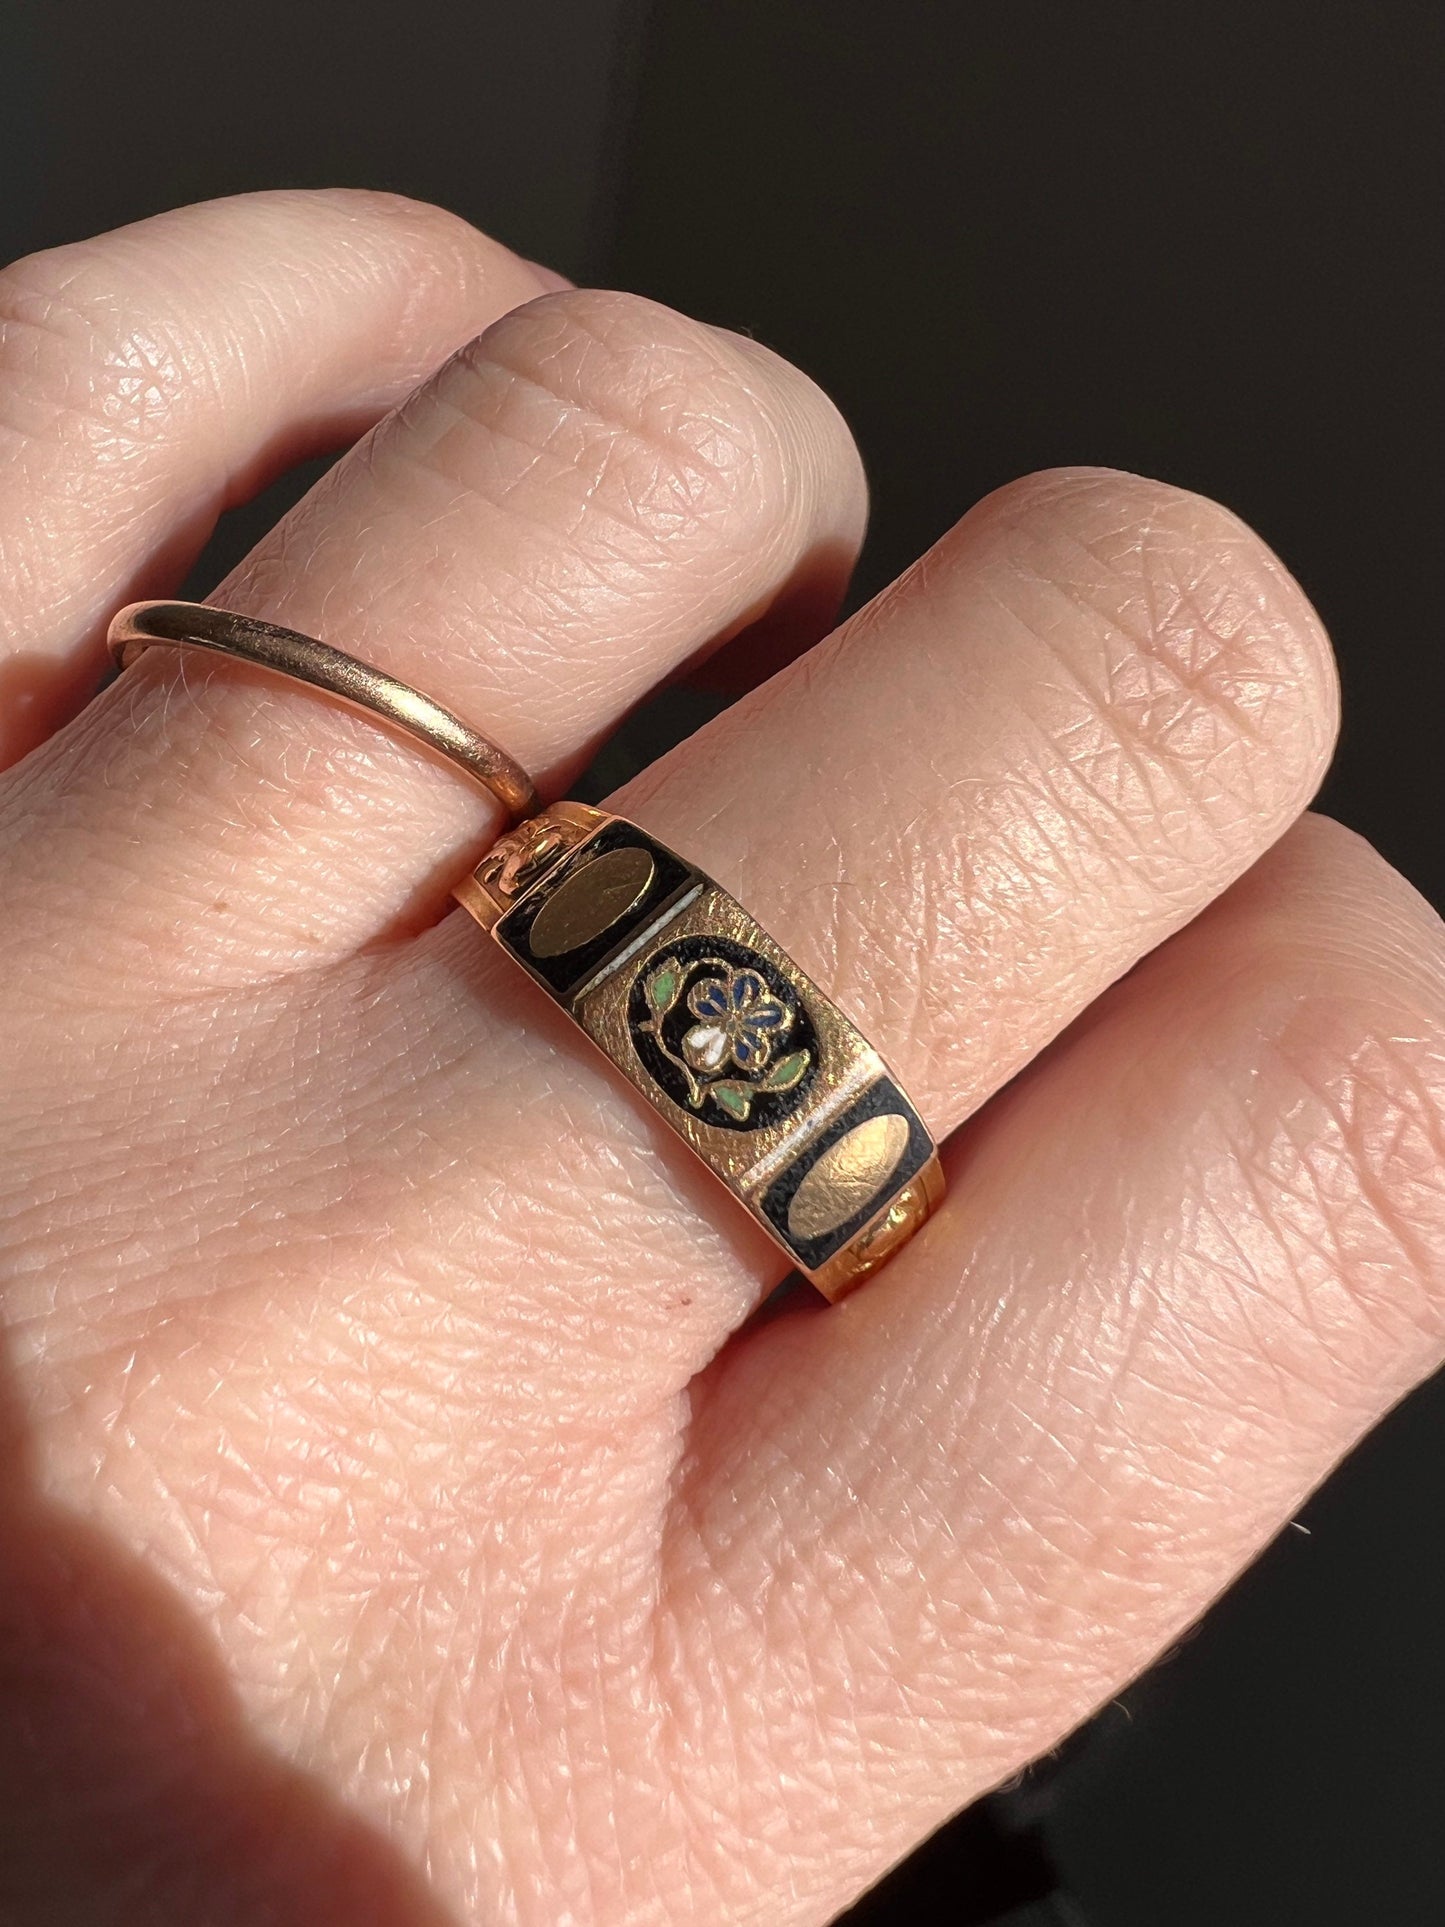 PANSY Antique FRENCH Regional Black Enamel 18k Gold Wedding Band Ring Floral Geometric ANTiQUE Think of Me Stacker Romantic Gift Traditional